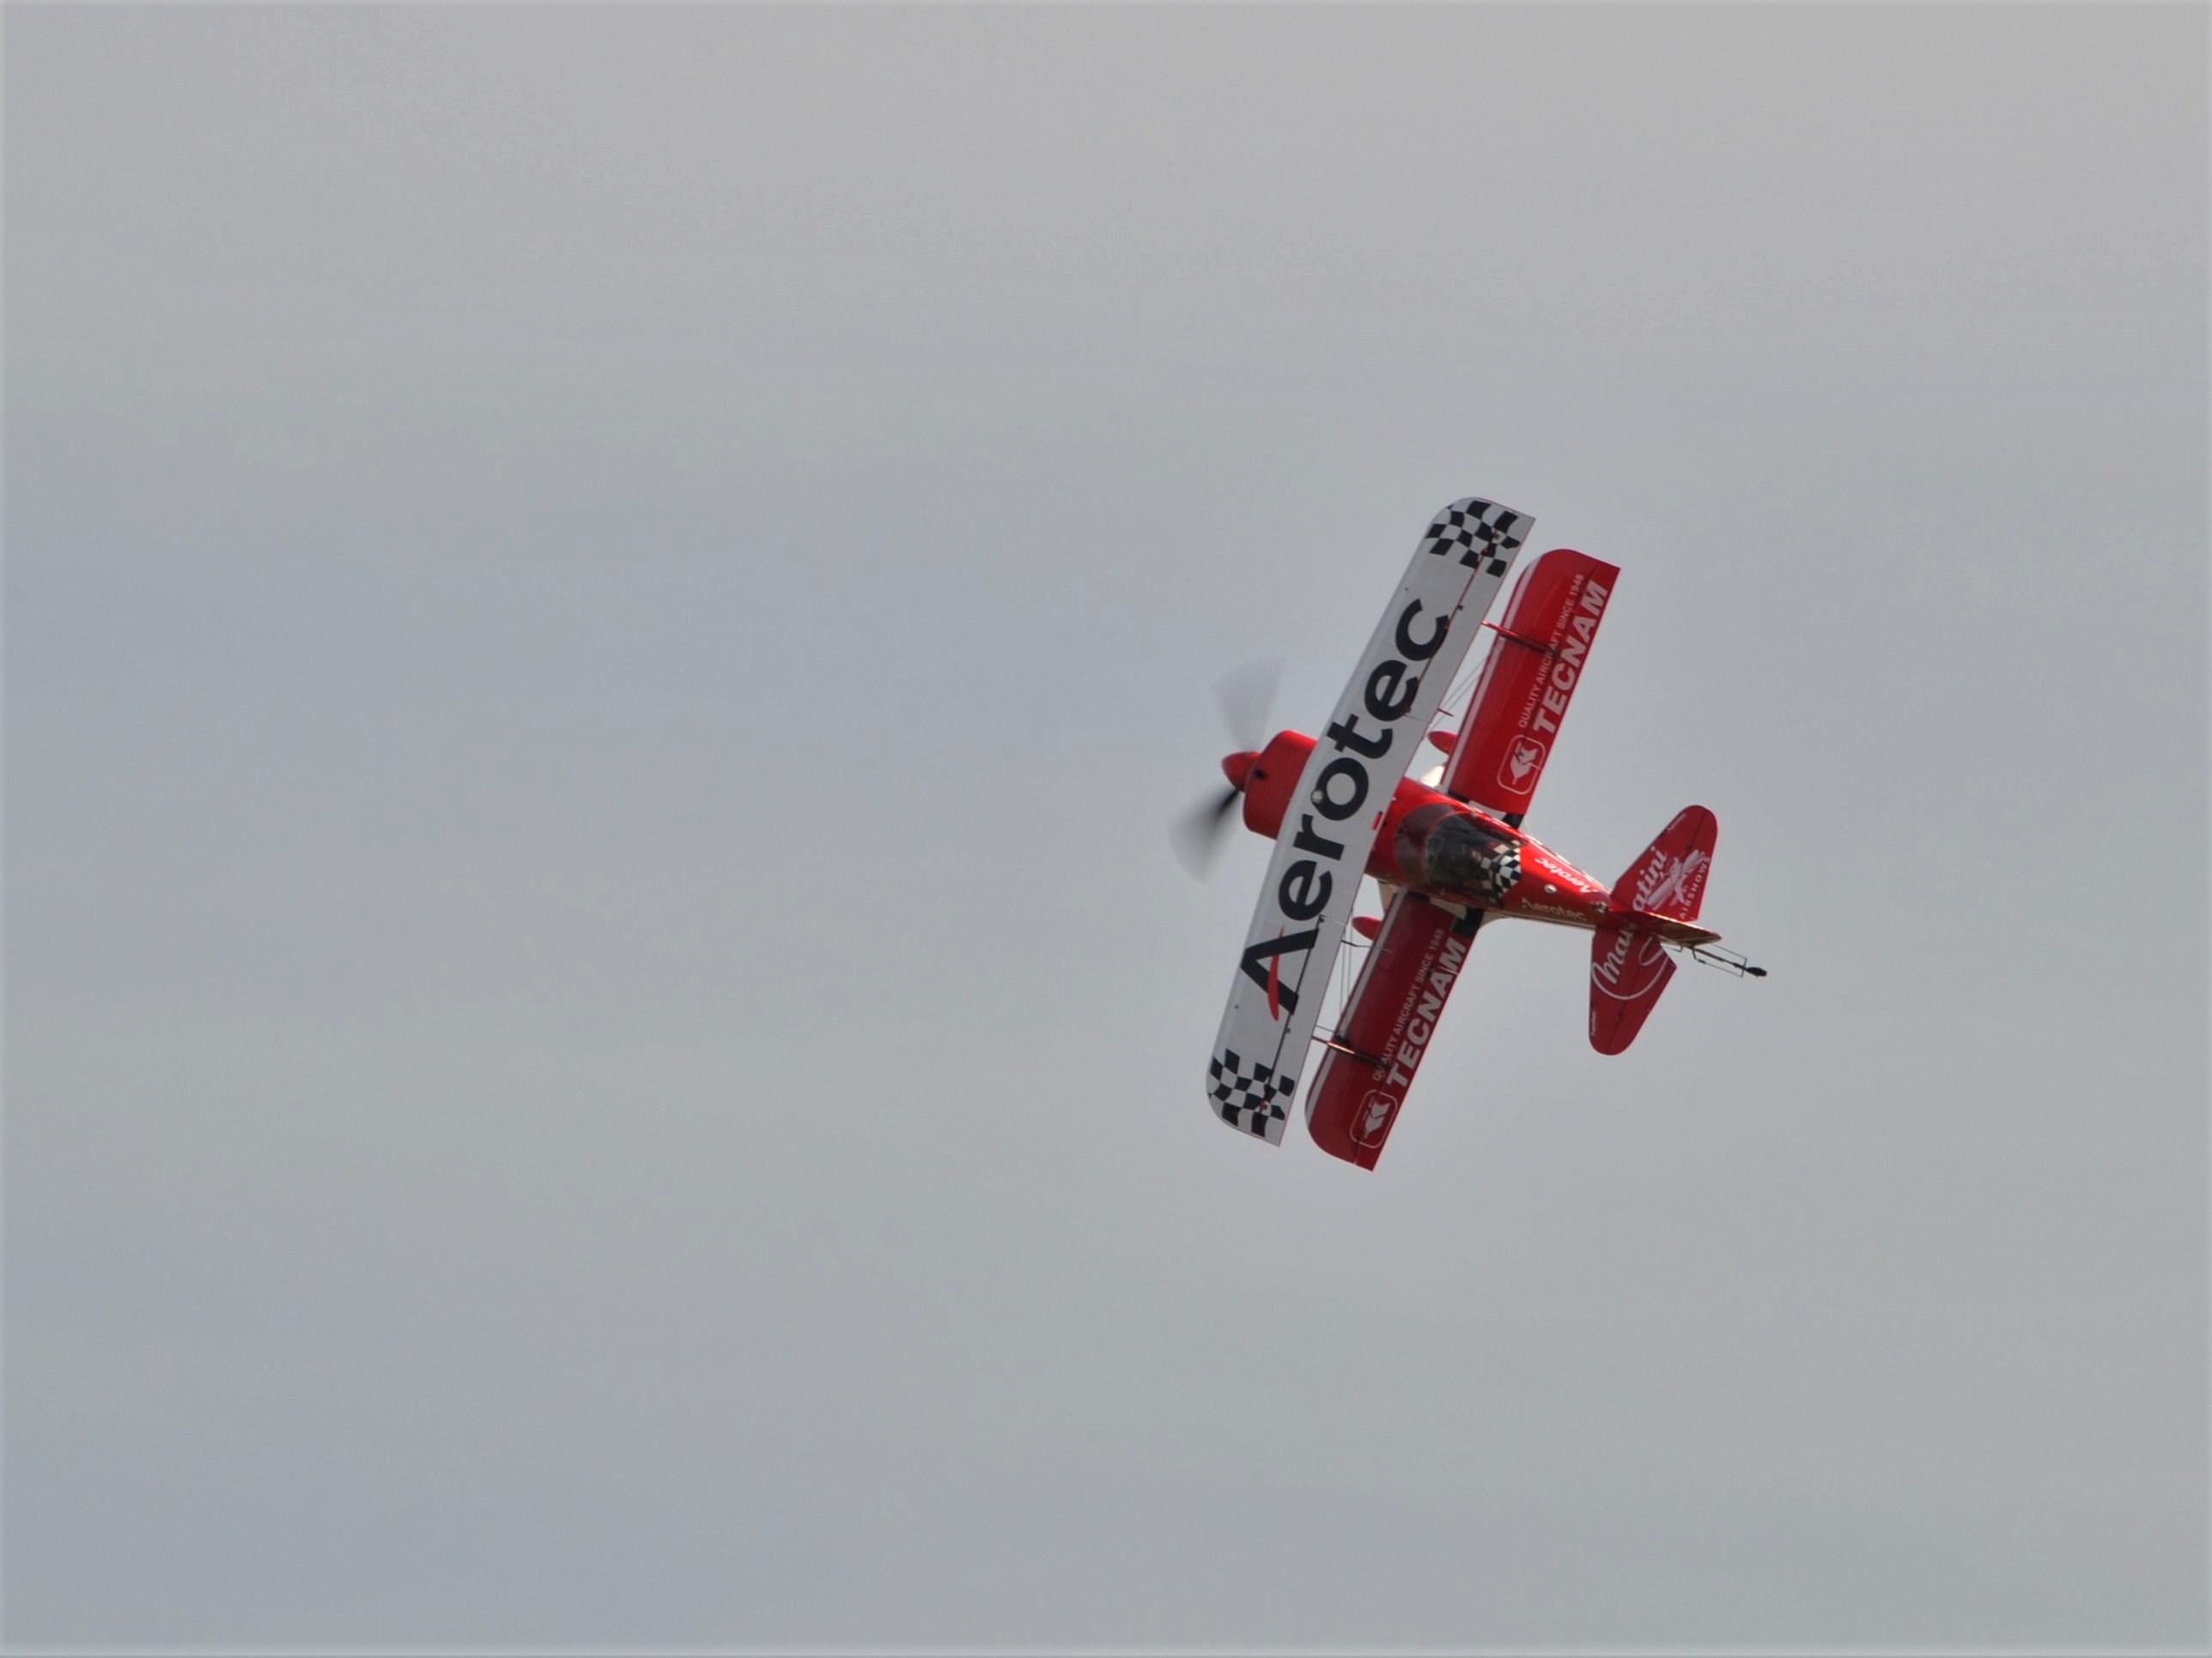 Pitts S1.